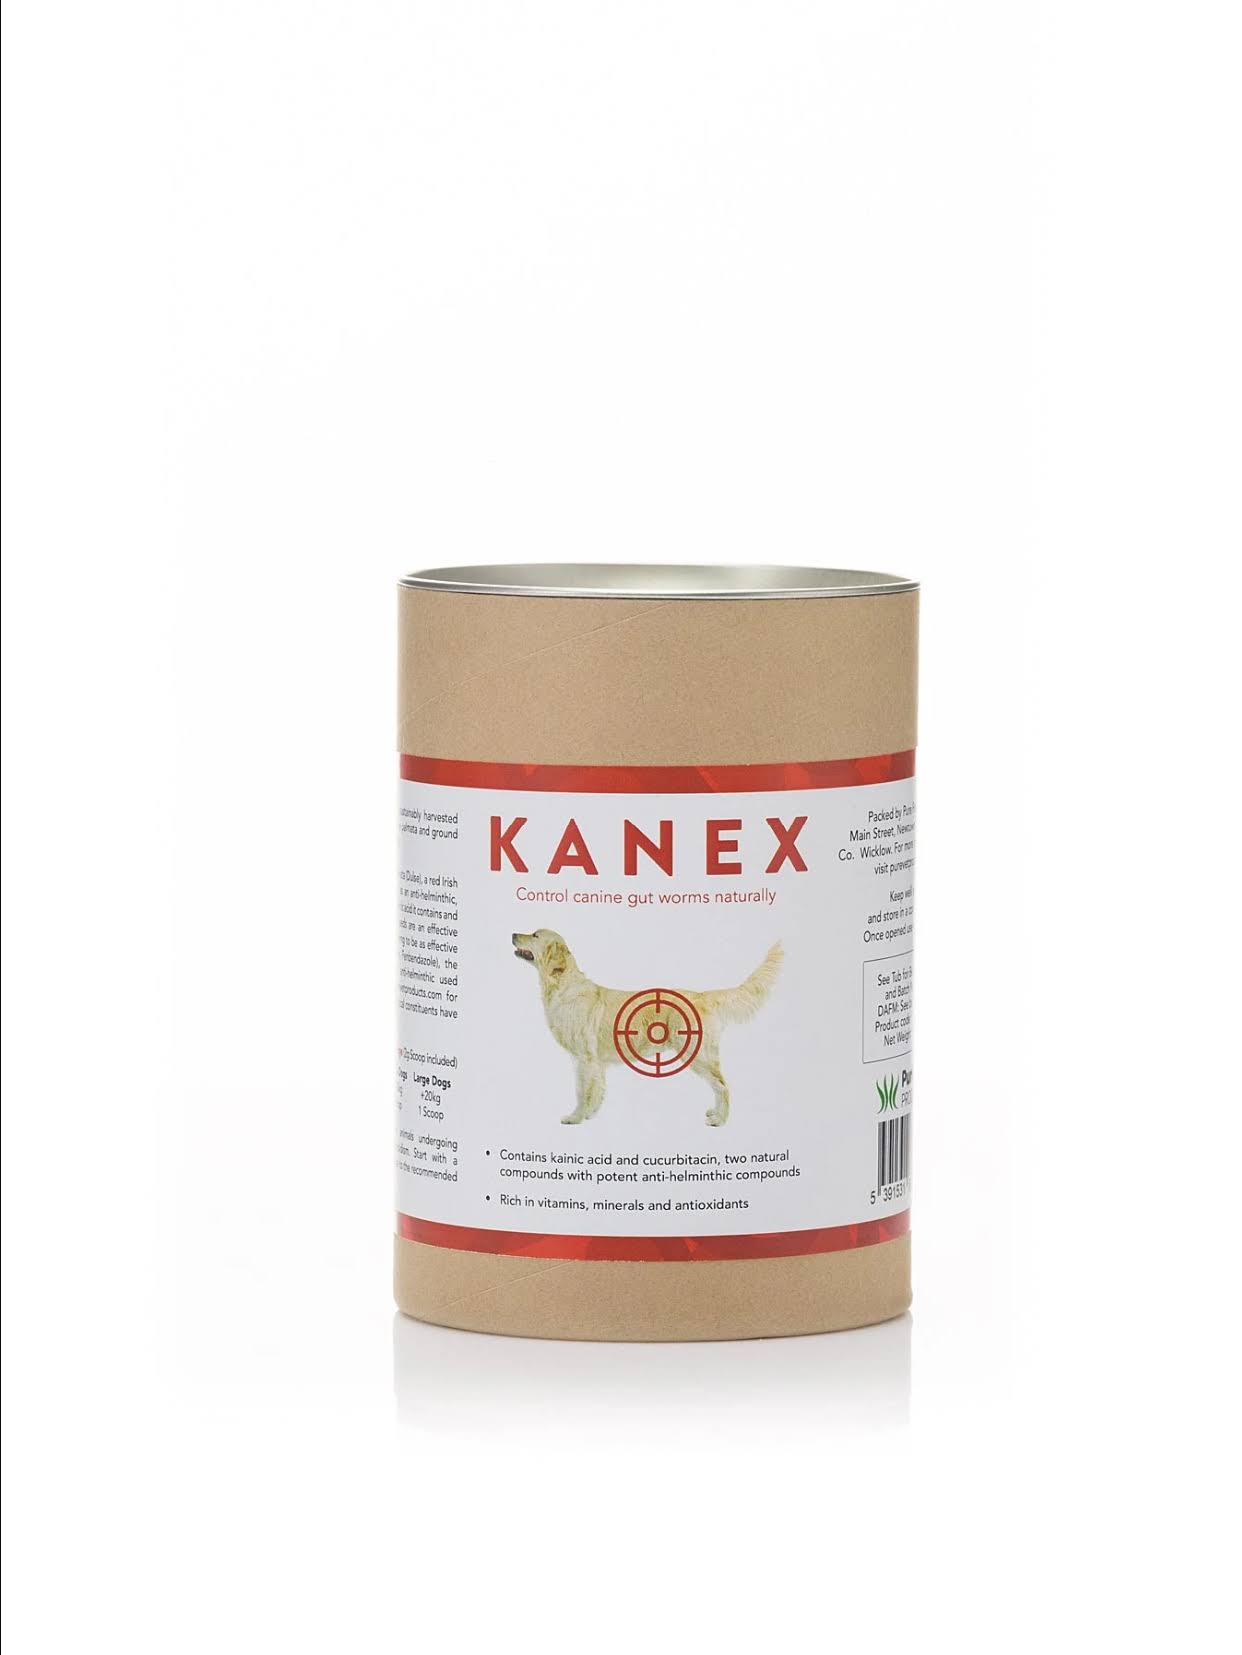 KANEX – Natural Worm Preventative for Dogs & Cats